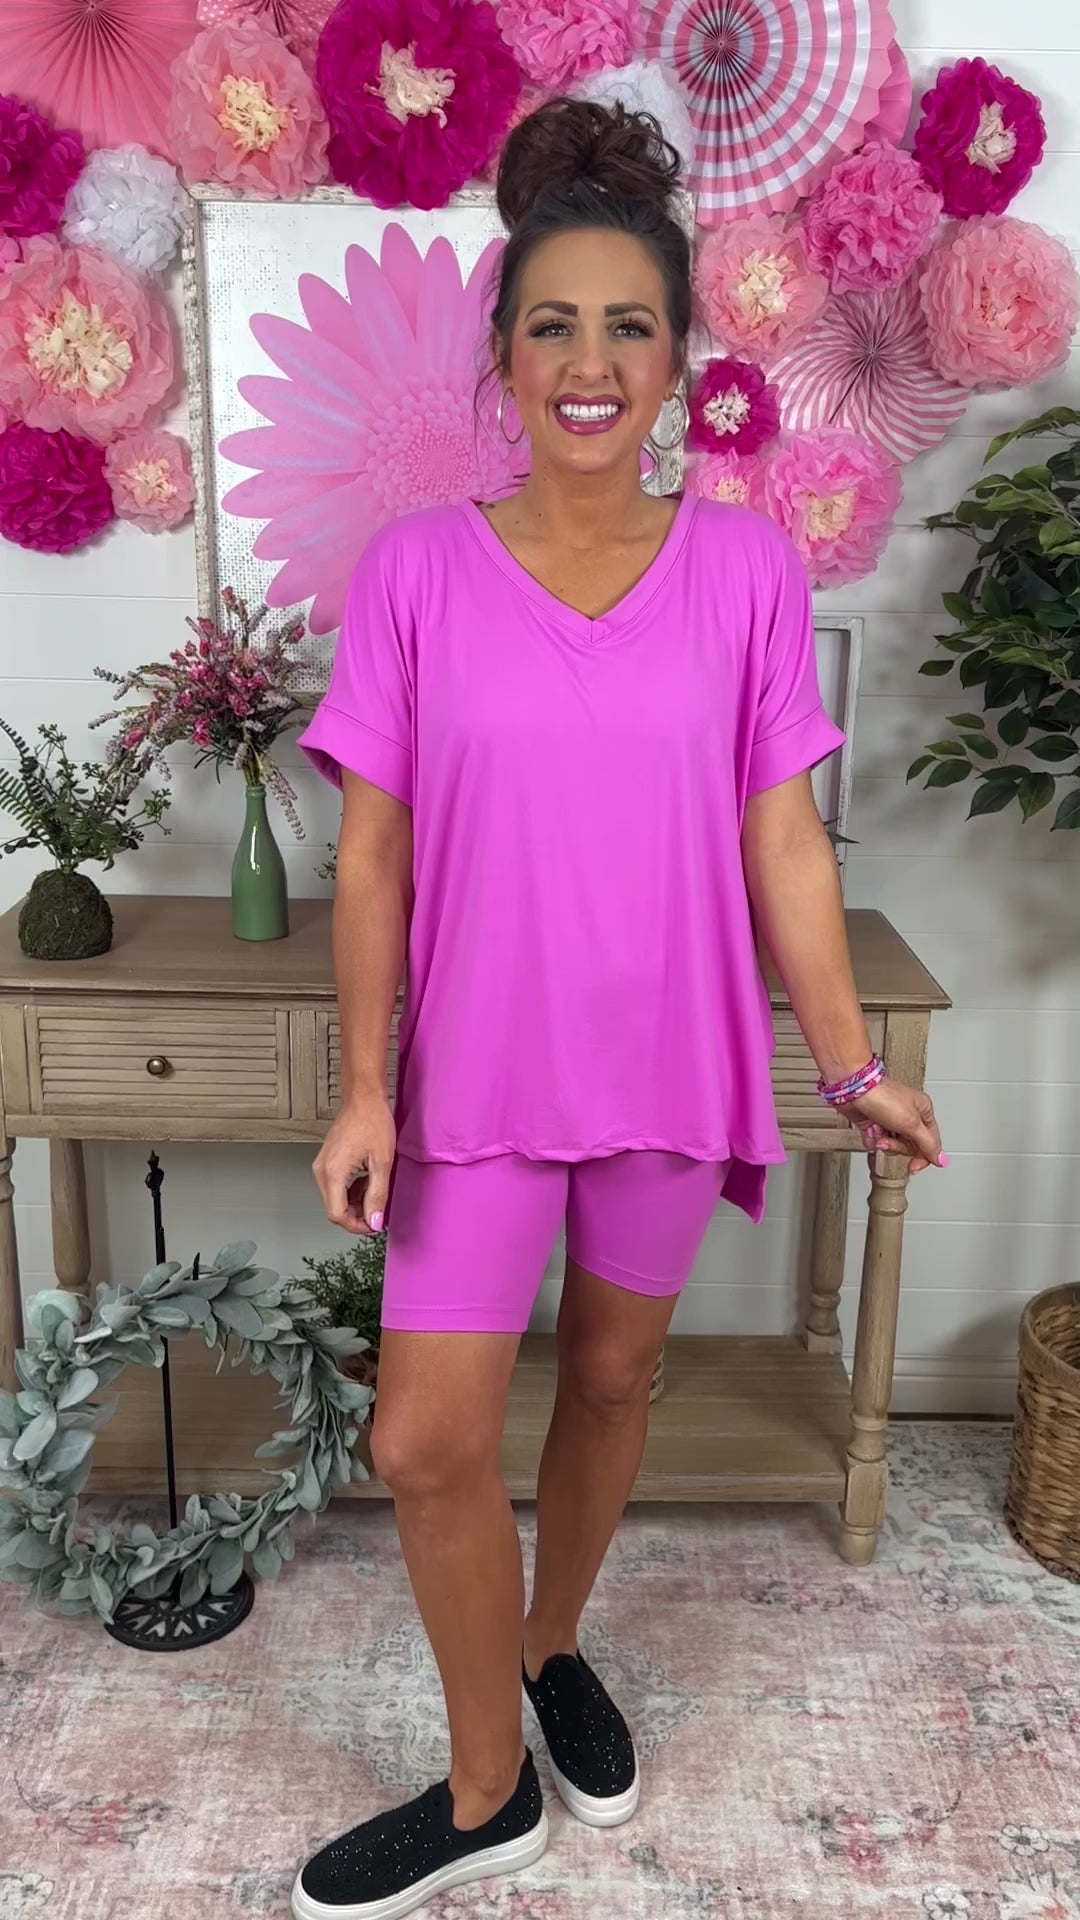 Microfiber V-Neck Top W/ Biker Shorts Set - 4 Color Options - Available Small- Extended Sizes